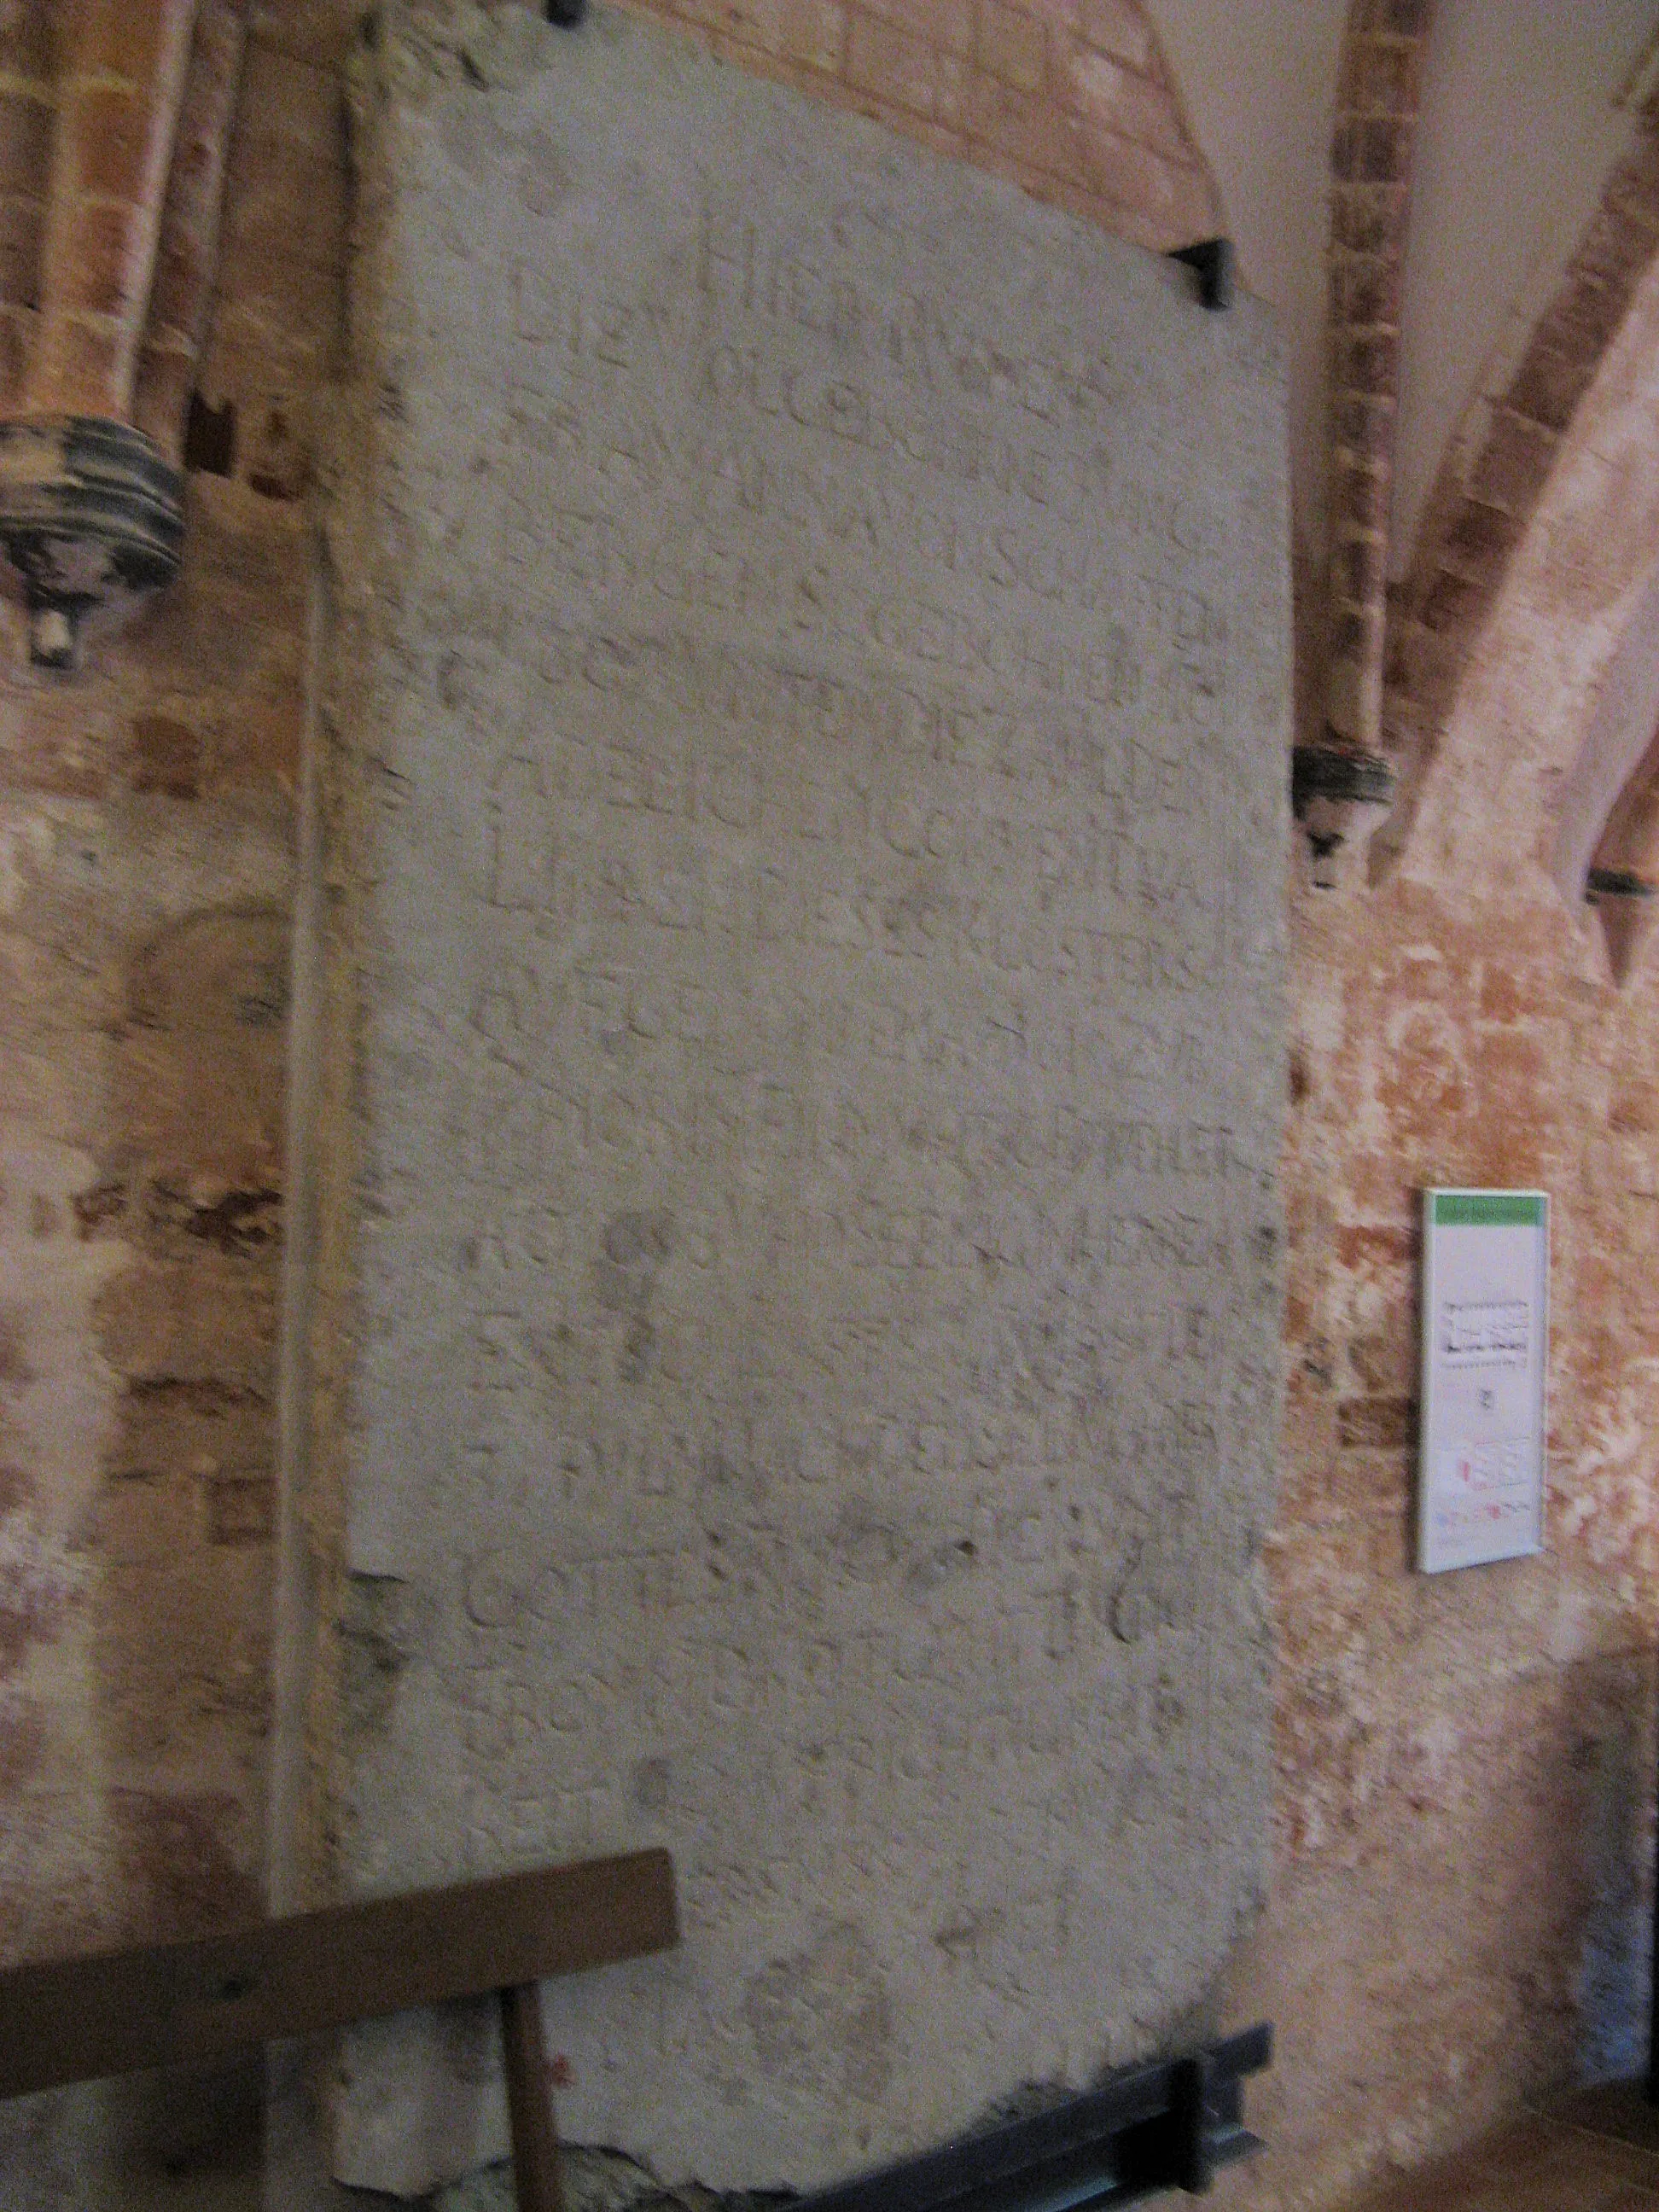 Photo showing: Ledger stone in the cloister of Monastery Dobbertin, district Parchim, Mecklenburg-Vorpommern, Germany